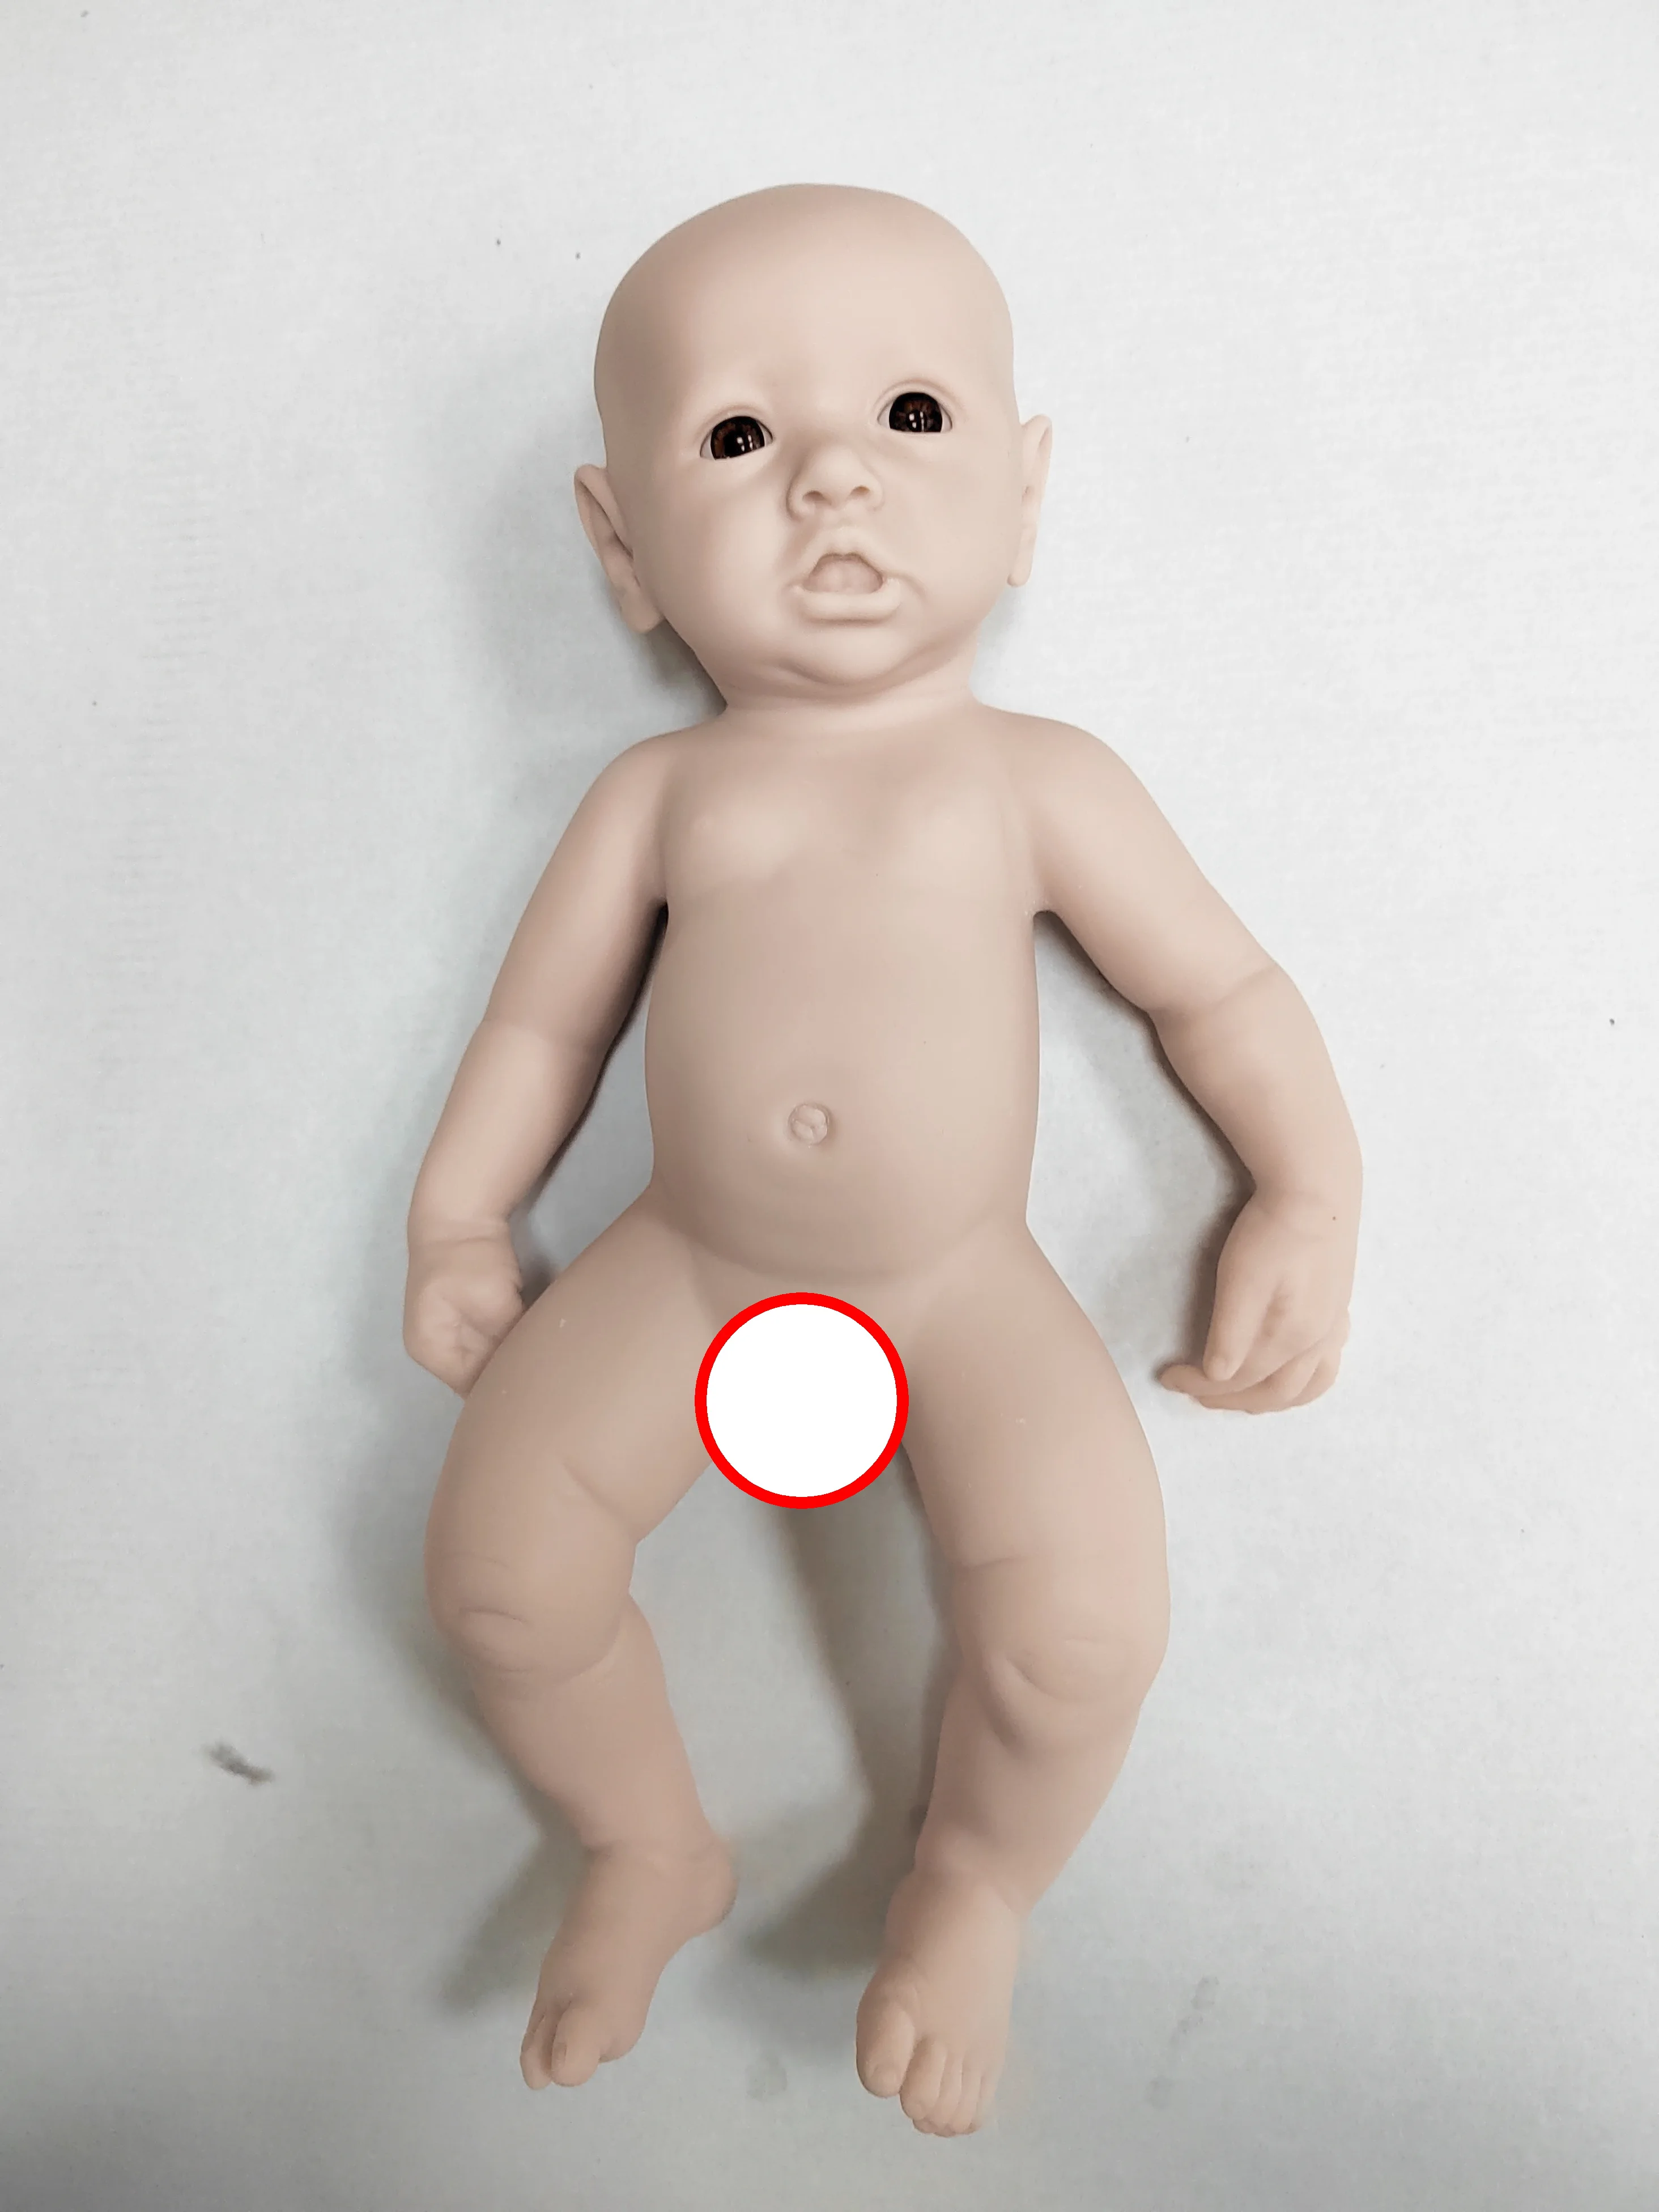 AISITE full silicone baby dolls 16.54 in hair girls, not vinyl